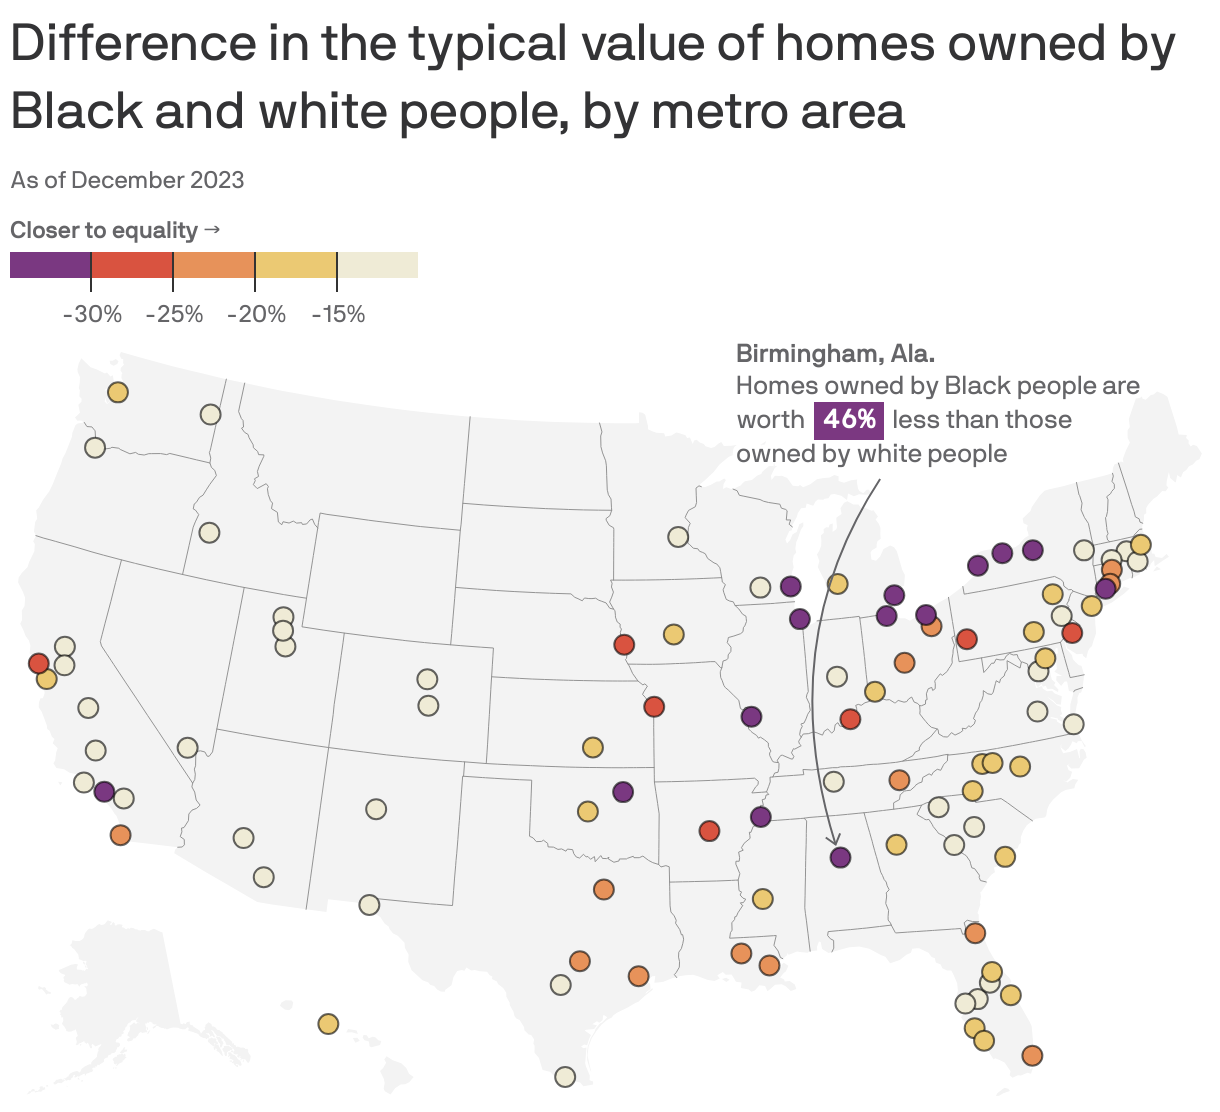 Difference in the typical value of homes owned by Black and white people, by metro area